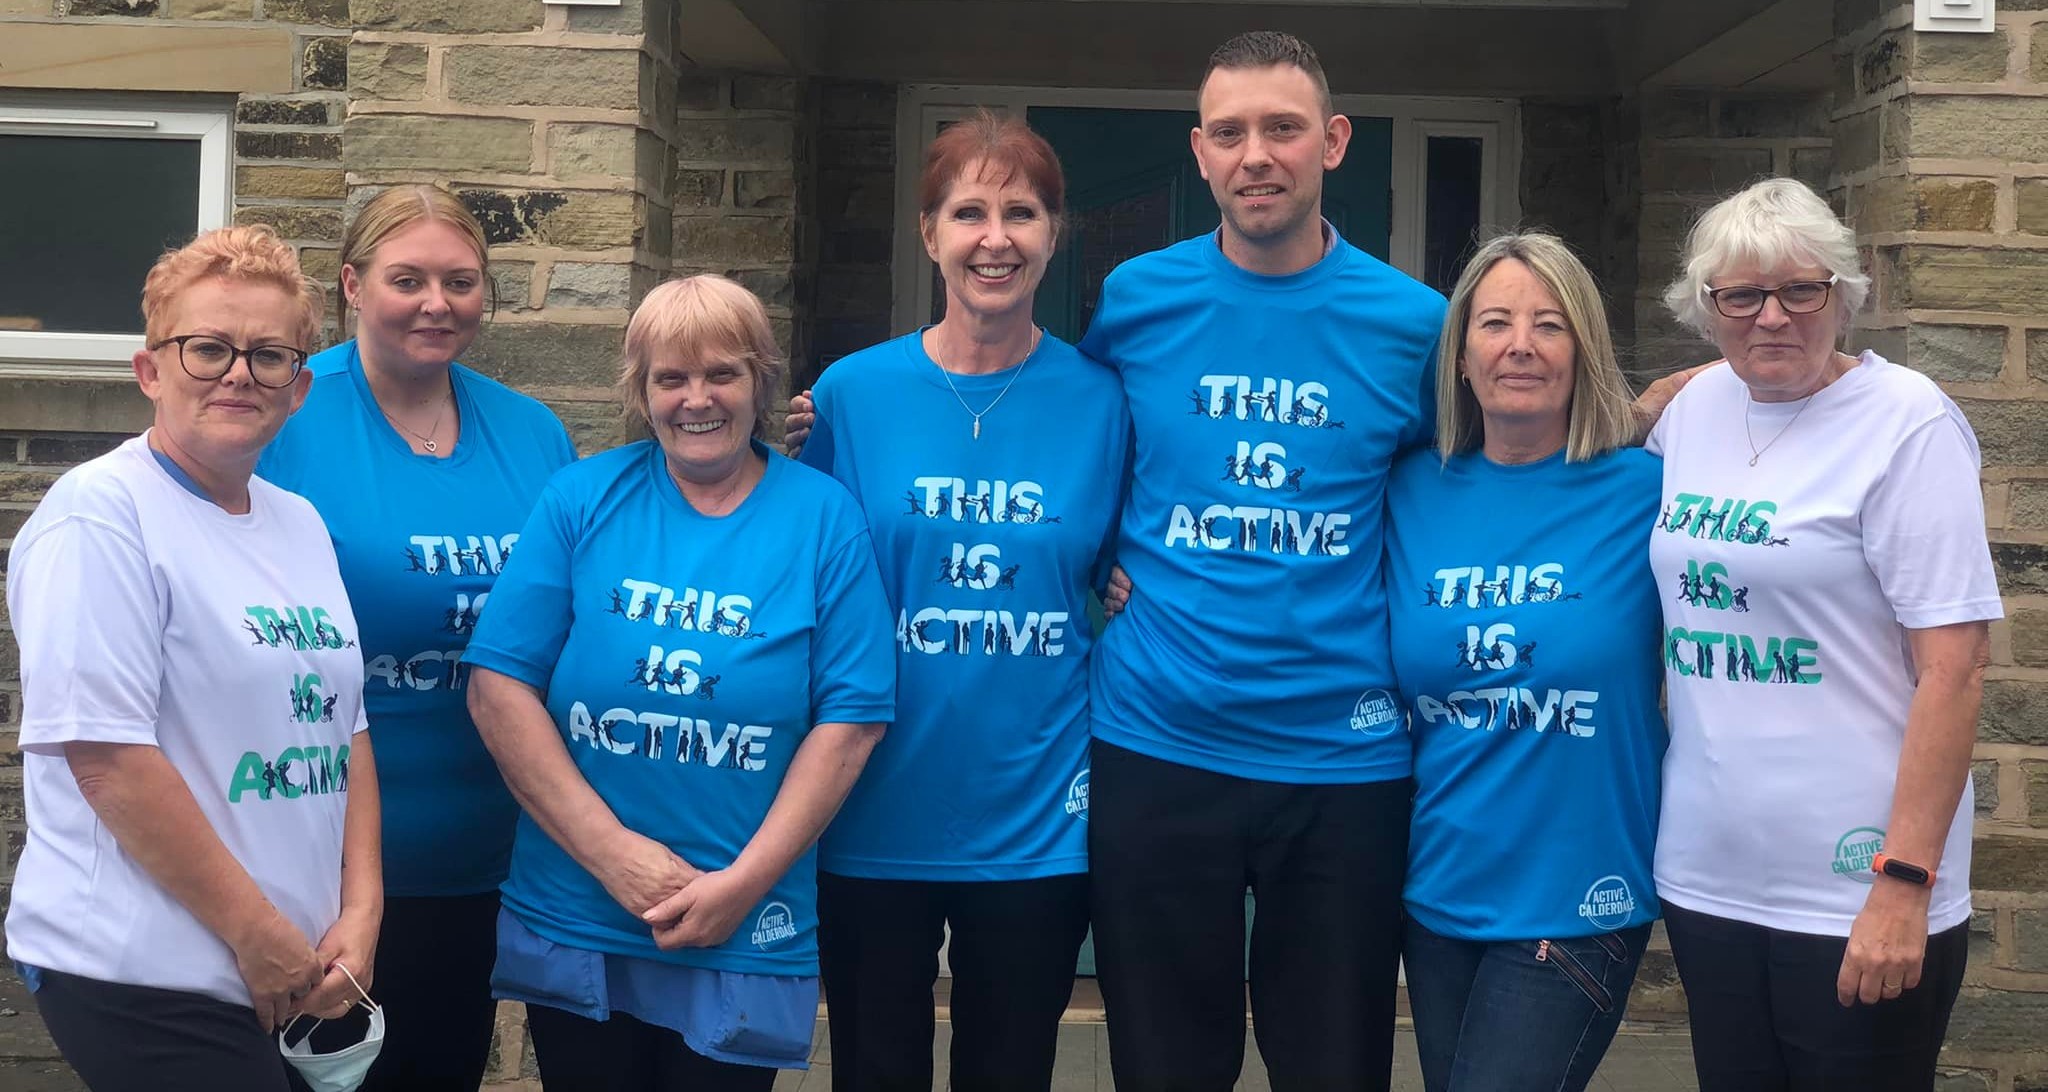 Seven members of staff from St Winifred's Nursing Home, stood outside wearing 'This is Active' t-shirts.